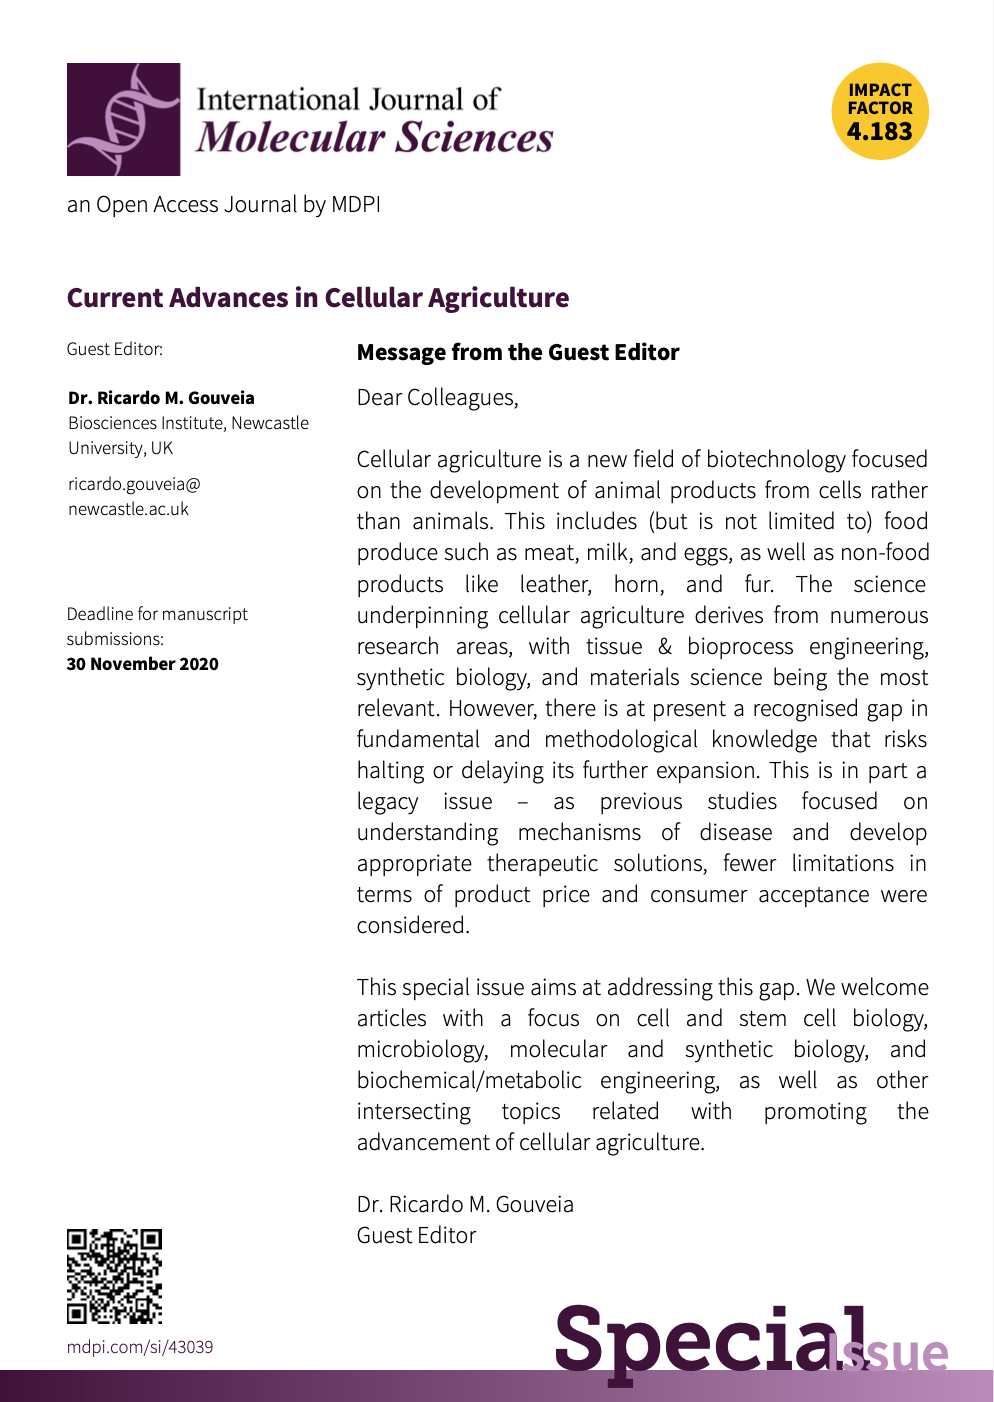 flyer with text: Cellular agriculture is a new field of biotechnology focused on the development of animal products from cells rather than animals. This includes (but is not limited to) food produce such as meat, milk, and eggs, as well as non-food products like leather, horn, and fur. The science underpinning cellular agriculture derives from numerous research areas, with tissue & bioprocess engineering, synthetic biology, and materials science being the most relevant. Indeed, its feasibility is supported by relatively recent scientific and technological advances in these areas, particularly aiming the development of new biotherapeutics, biopharmaceutics, and bioartificial transplants. The rapid growth of cellular agriculture has also been driven by the increased perception of mounting impacts from intensive animal farming, namely on human health, animal welfare, and the environment. However, and despite considerable investment in industries of the field, there is at present a recognised gap in fundamental and methodological knowledge that risks halting or delaying its further expansion. This is in part a legacy issue – as previous studies focused on understanding mechanisms of disease and develop appropriate therapeutic solutions, fewer limitations in terms of product price and consumer acceptance were considered. This special issue therefore aims at addressing this gap. We welcome articles with a strong focus on cell and stem cell biology, microbiology, molecular and synthetic biology, and biochemical/metabolic engineering, as well as other intersecting topics related with promoting the advancement of cellular agriculture.